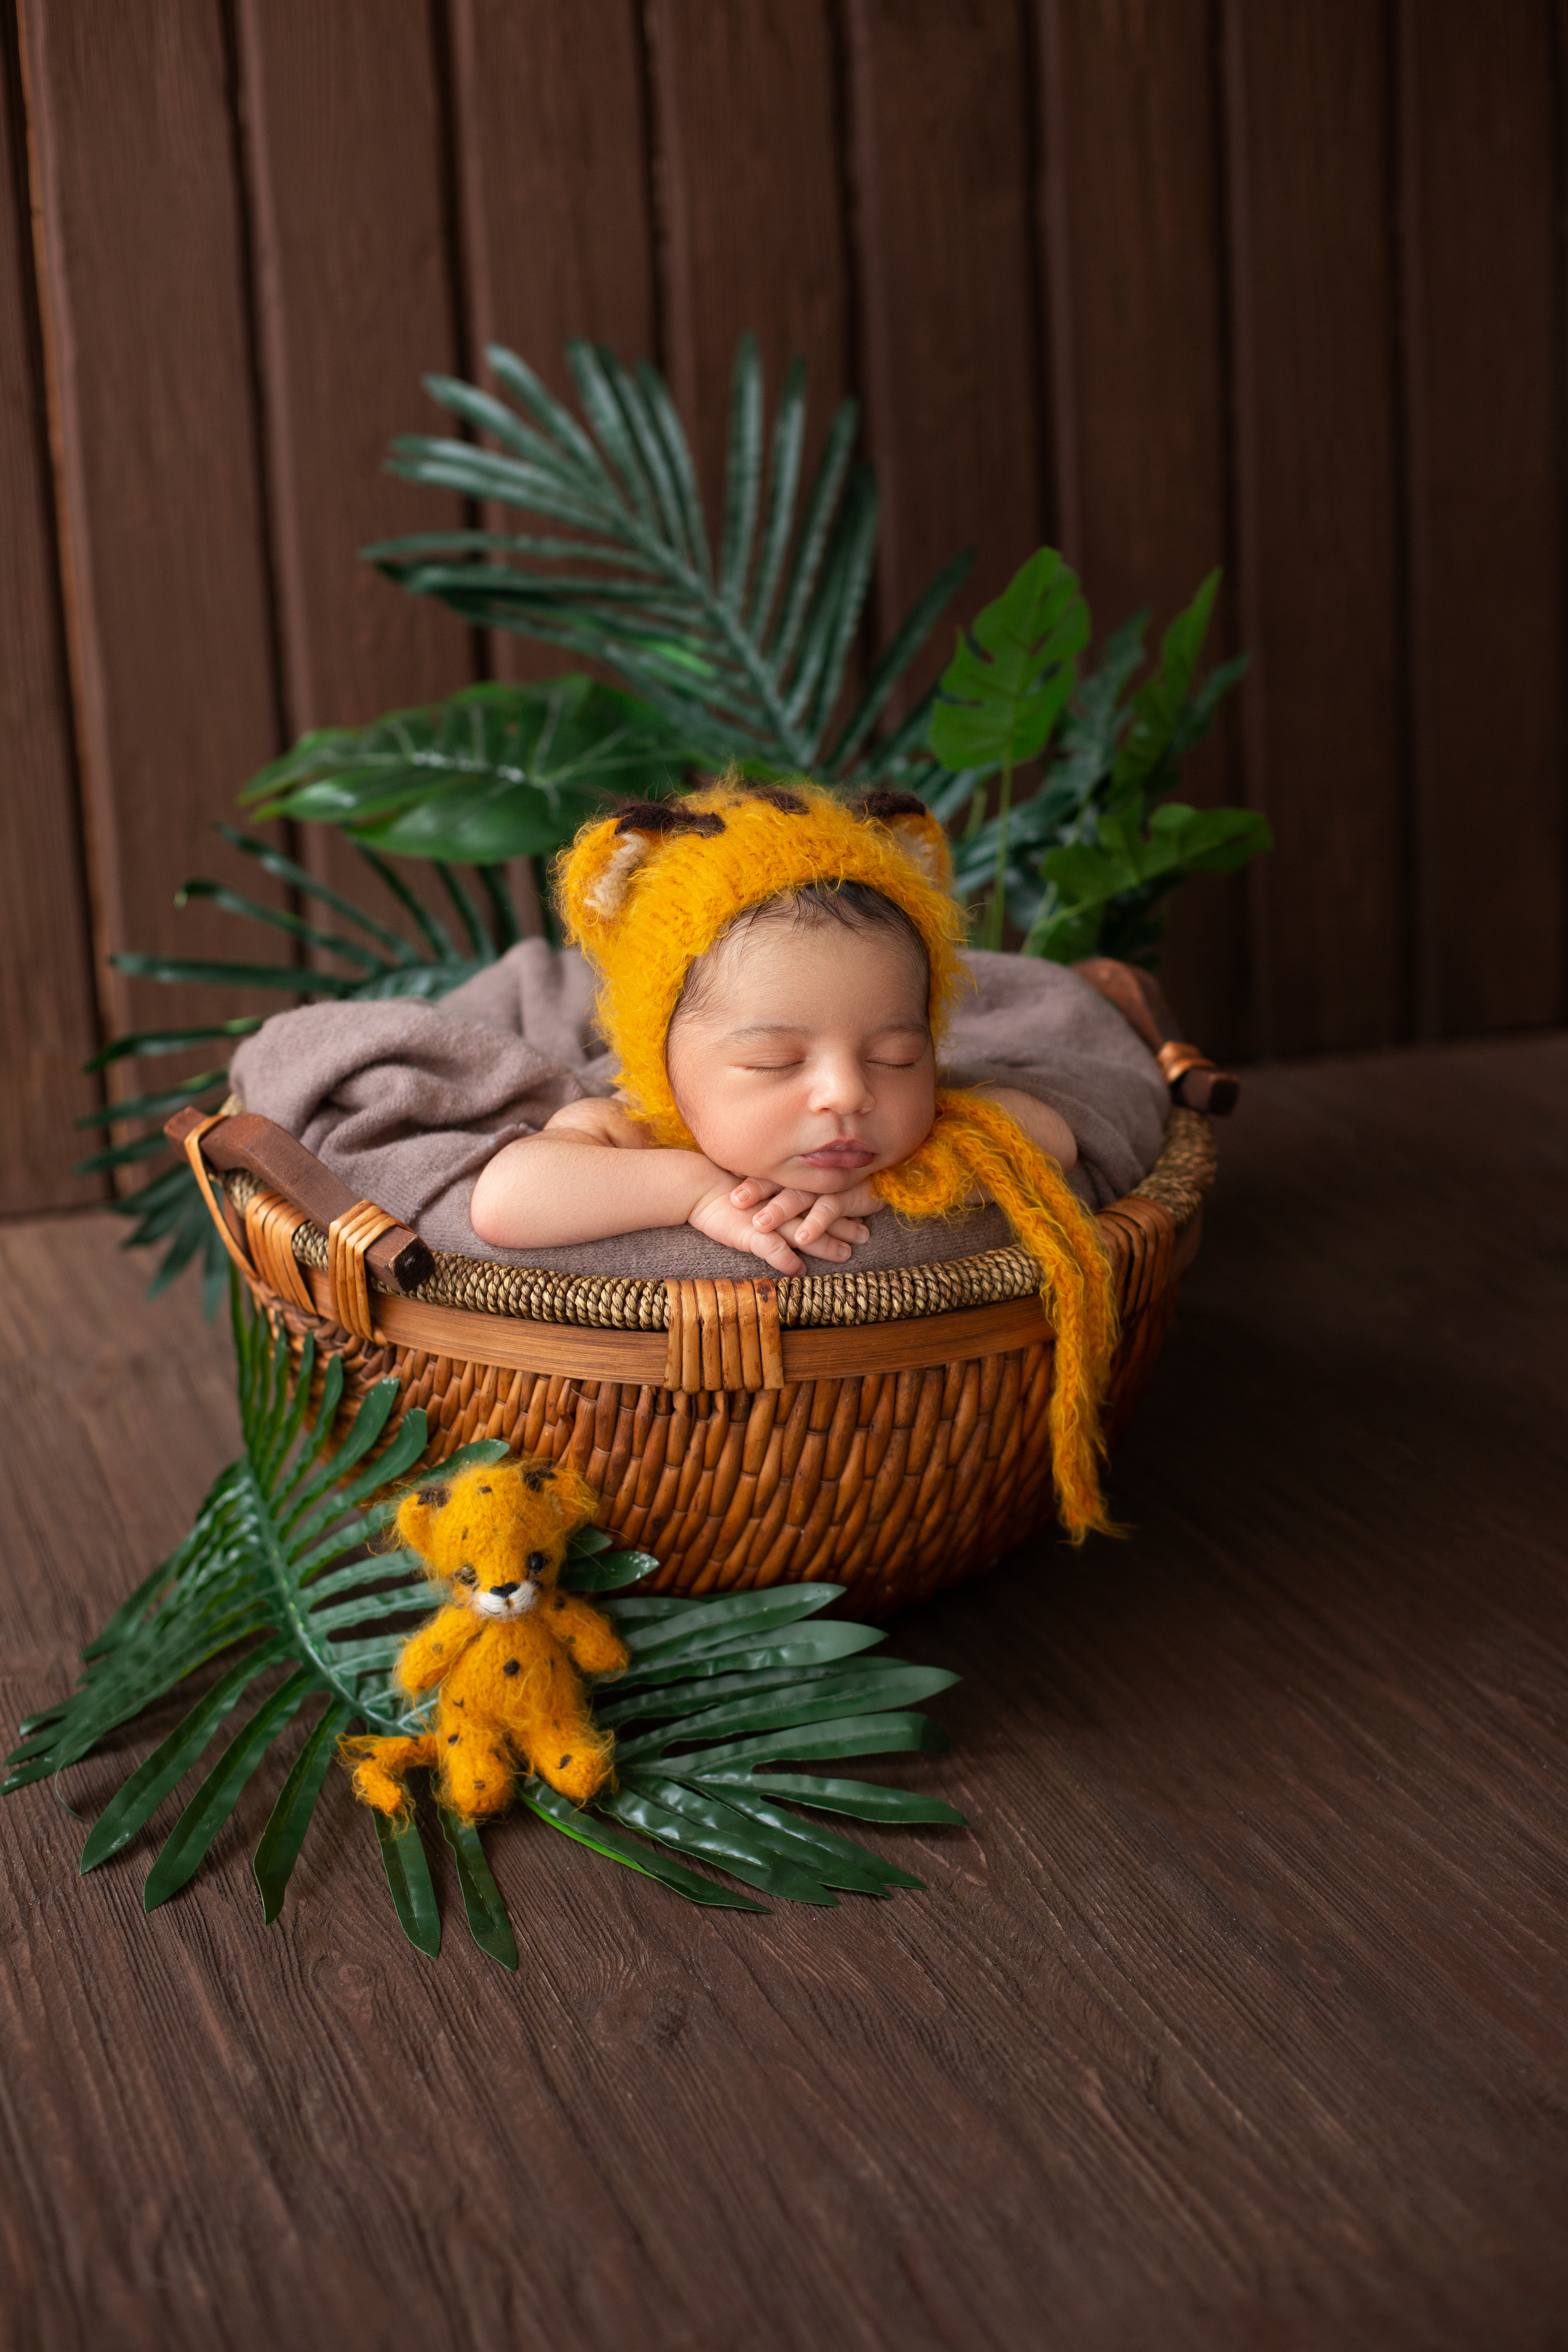 newborn-little-cute-likeable-baby-boy-laying-little-cute-yellow-animal-shaped-hat-inside-brown-basket-along-with-green-leafs-wooden-brown-room